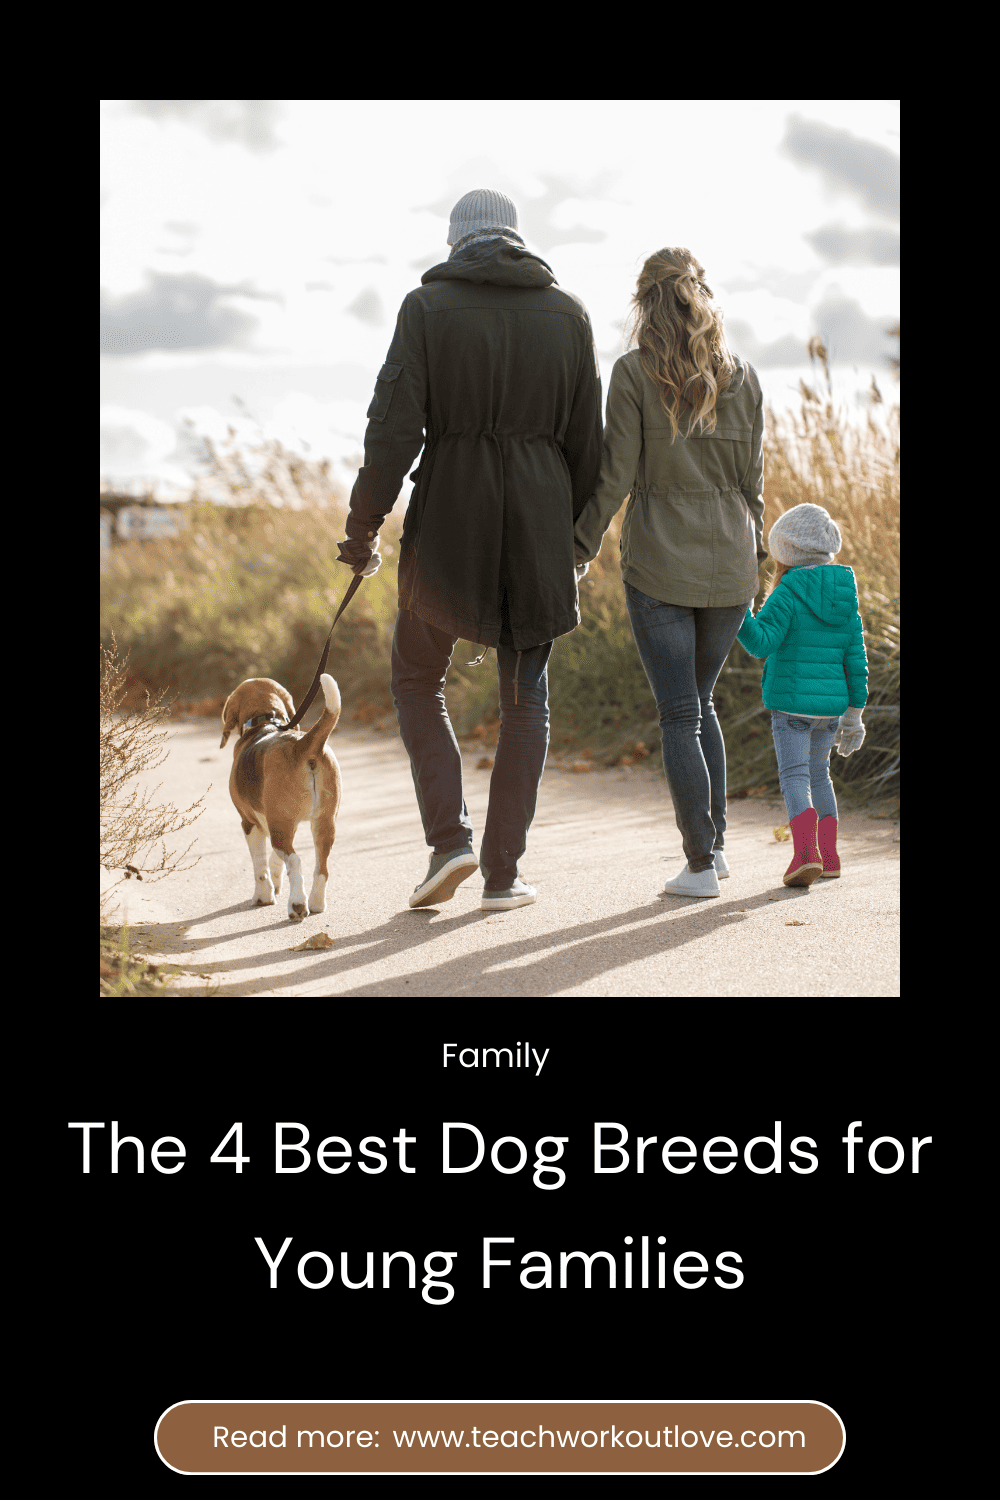 To help you find your perfect pooch, here are the four best dog breeds for families with younger children.